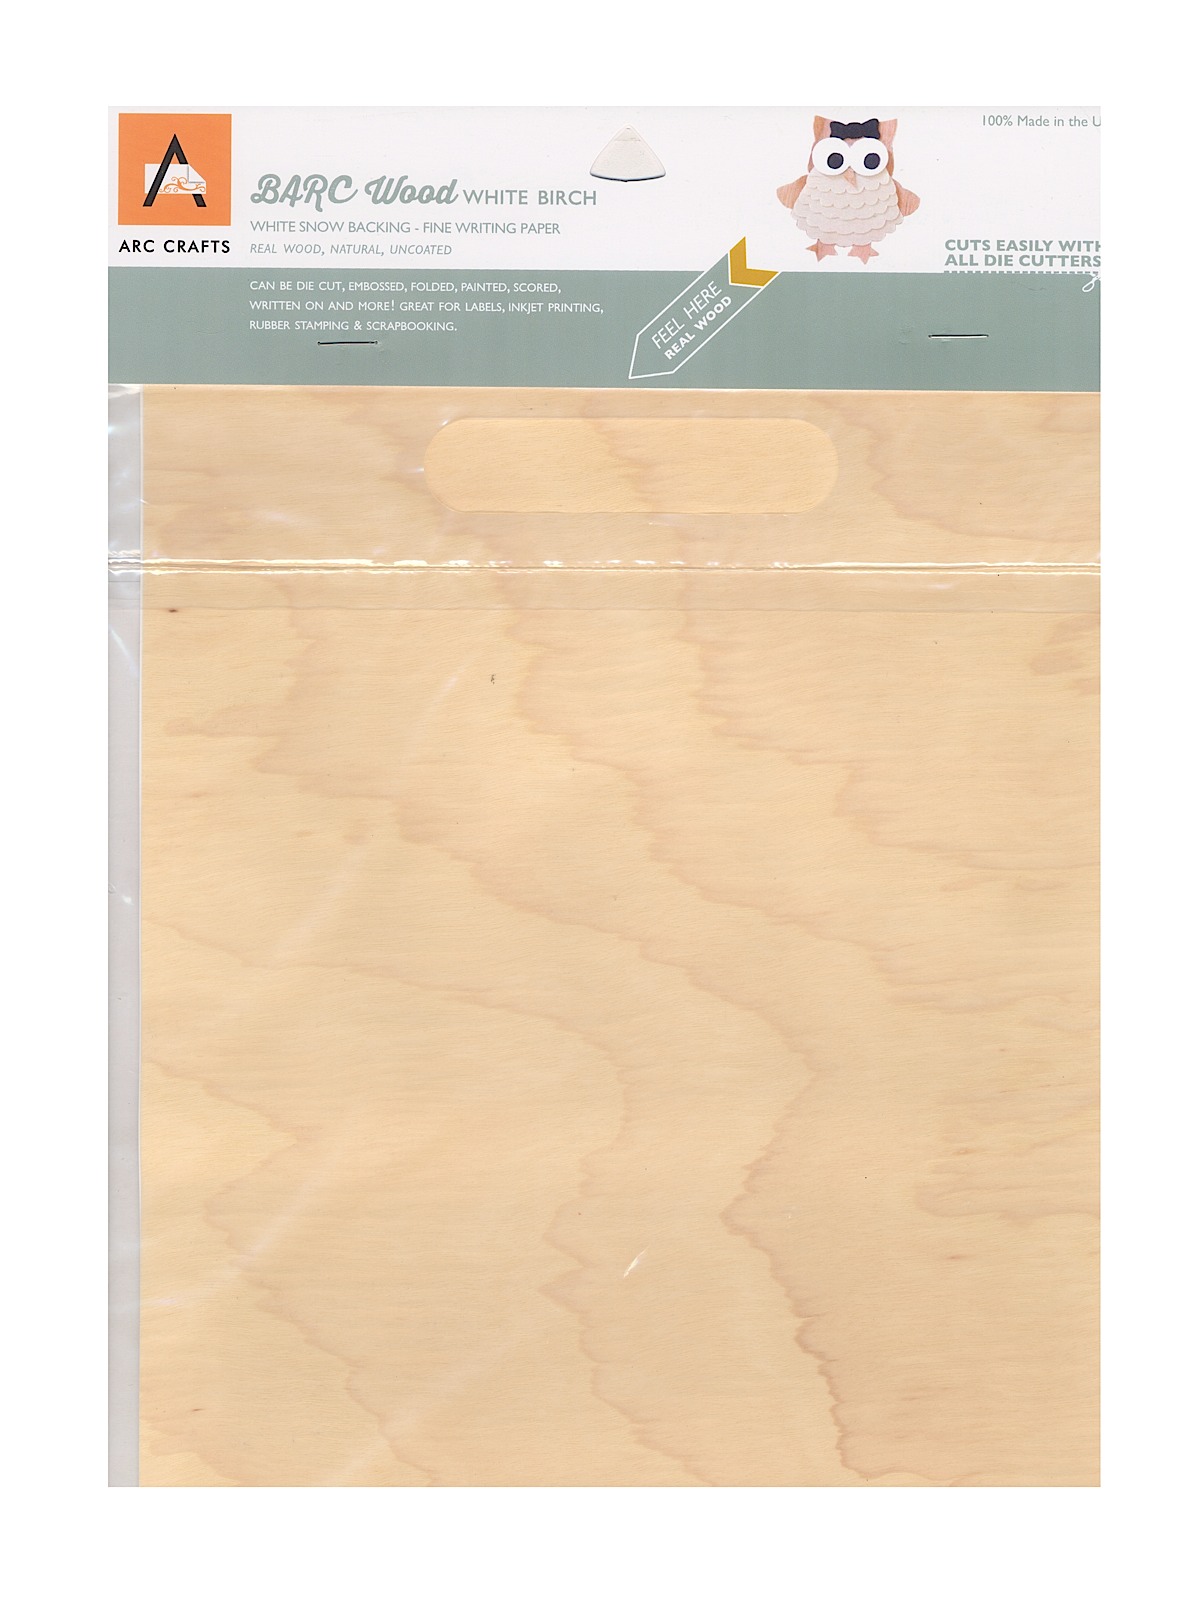 Real Wood Paper Sheets White Birch 8 1 2 In. X 11 In. Adhesive Backing